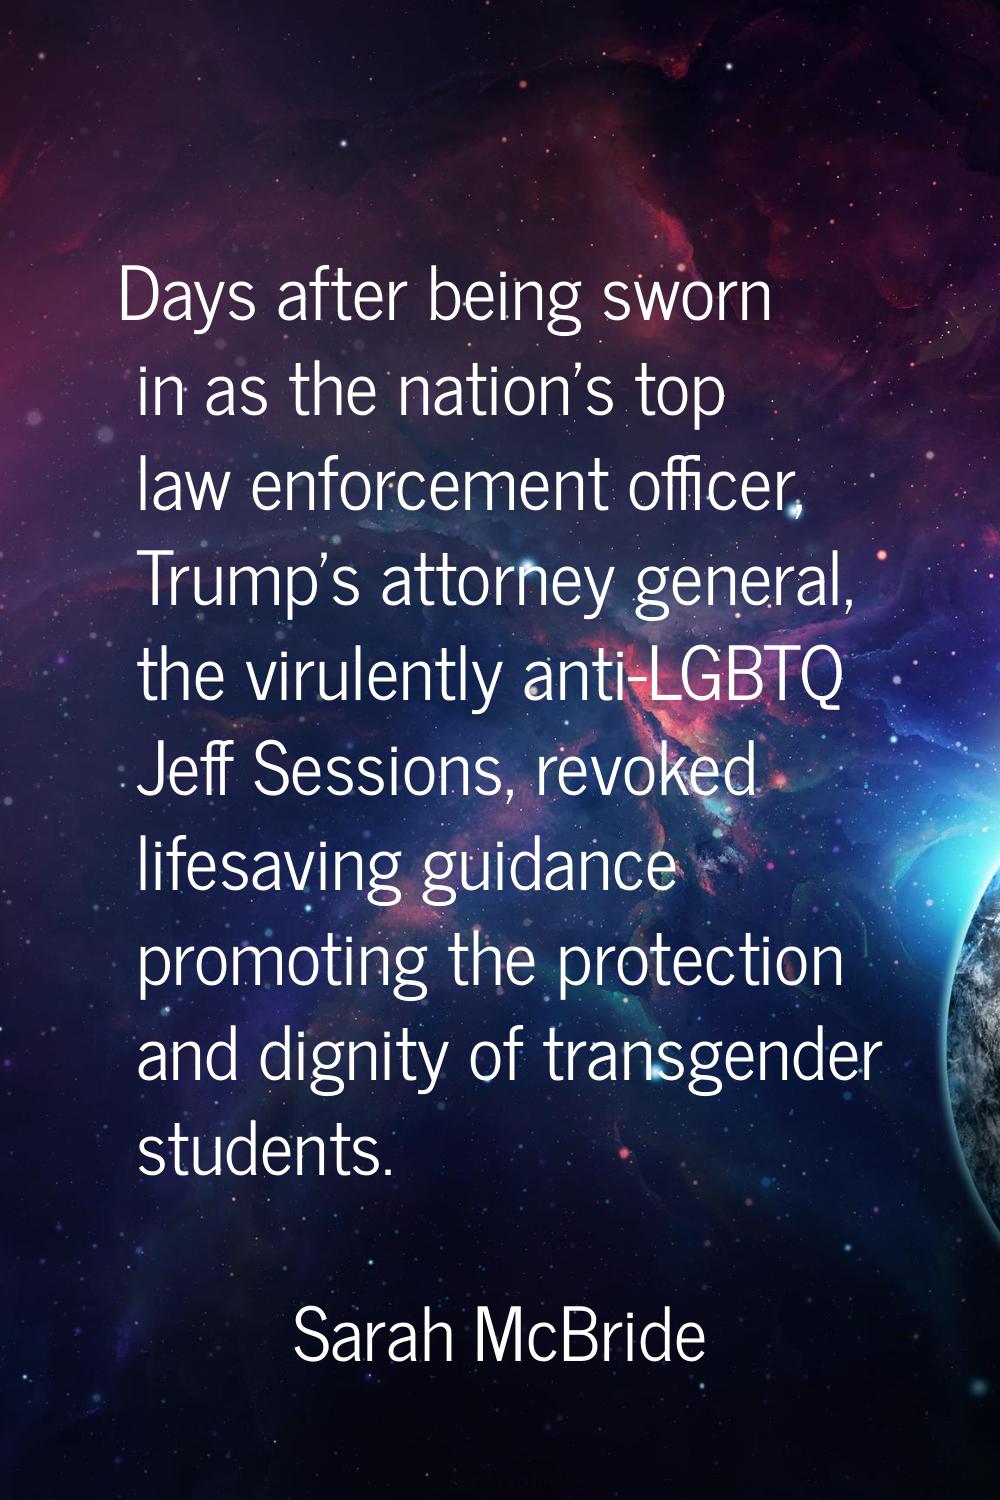 Days after being sworn in as the nation's top law enforcement officer, Trump's attorney general, th